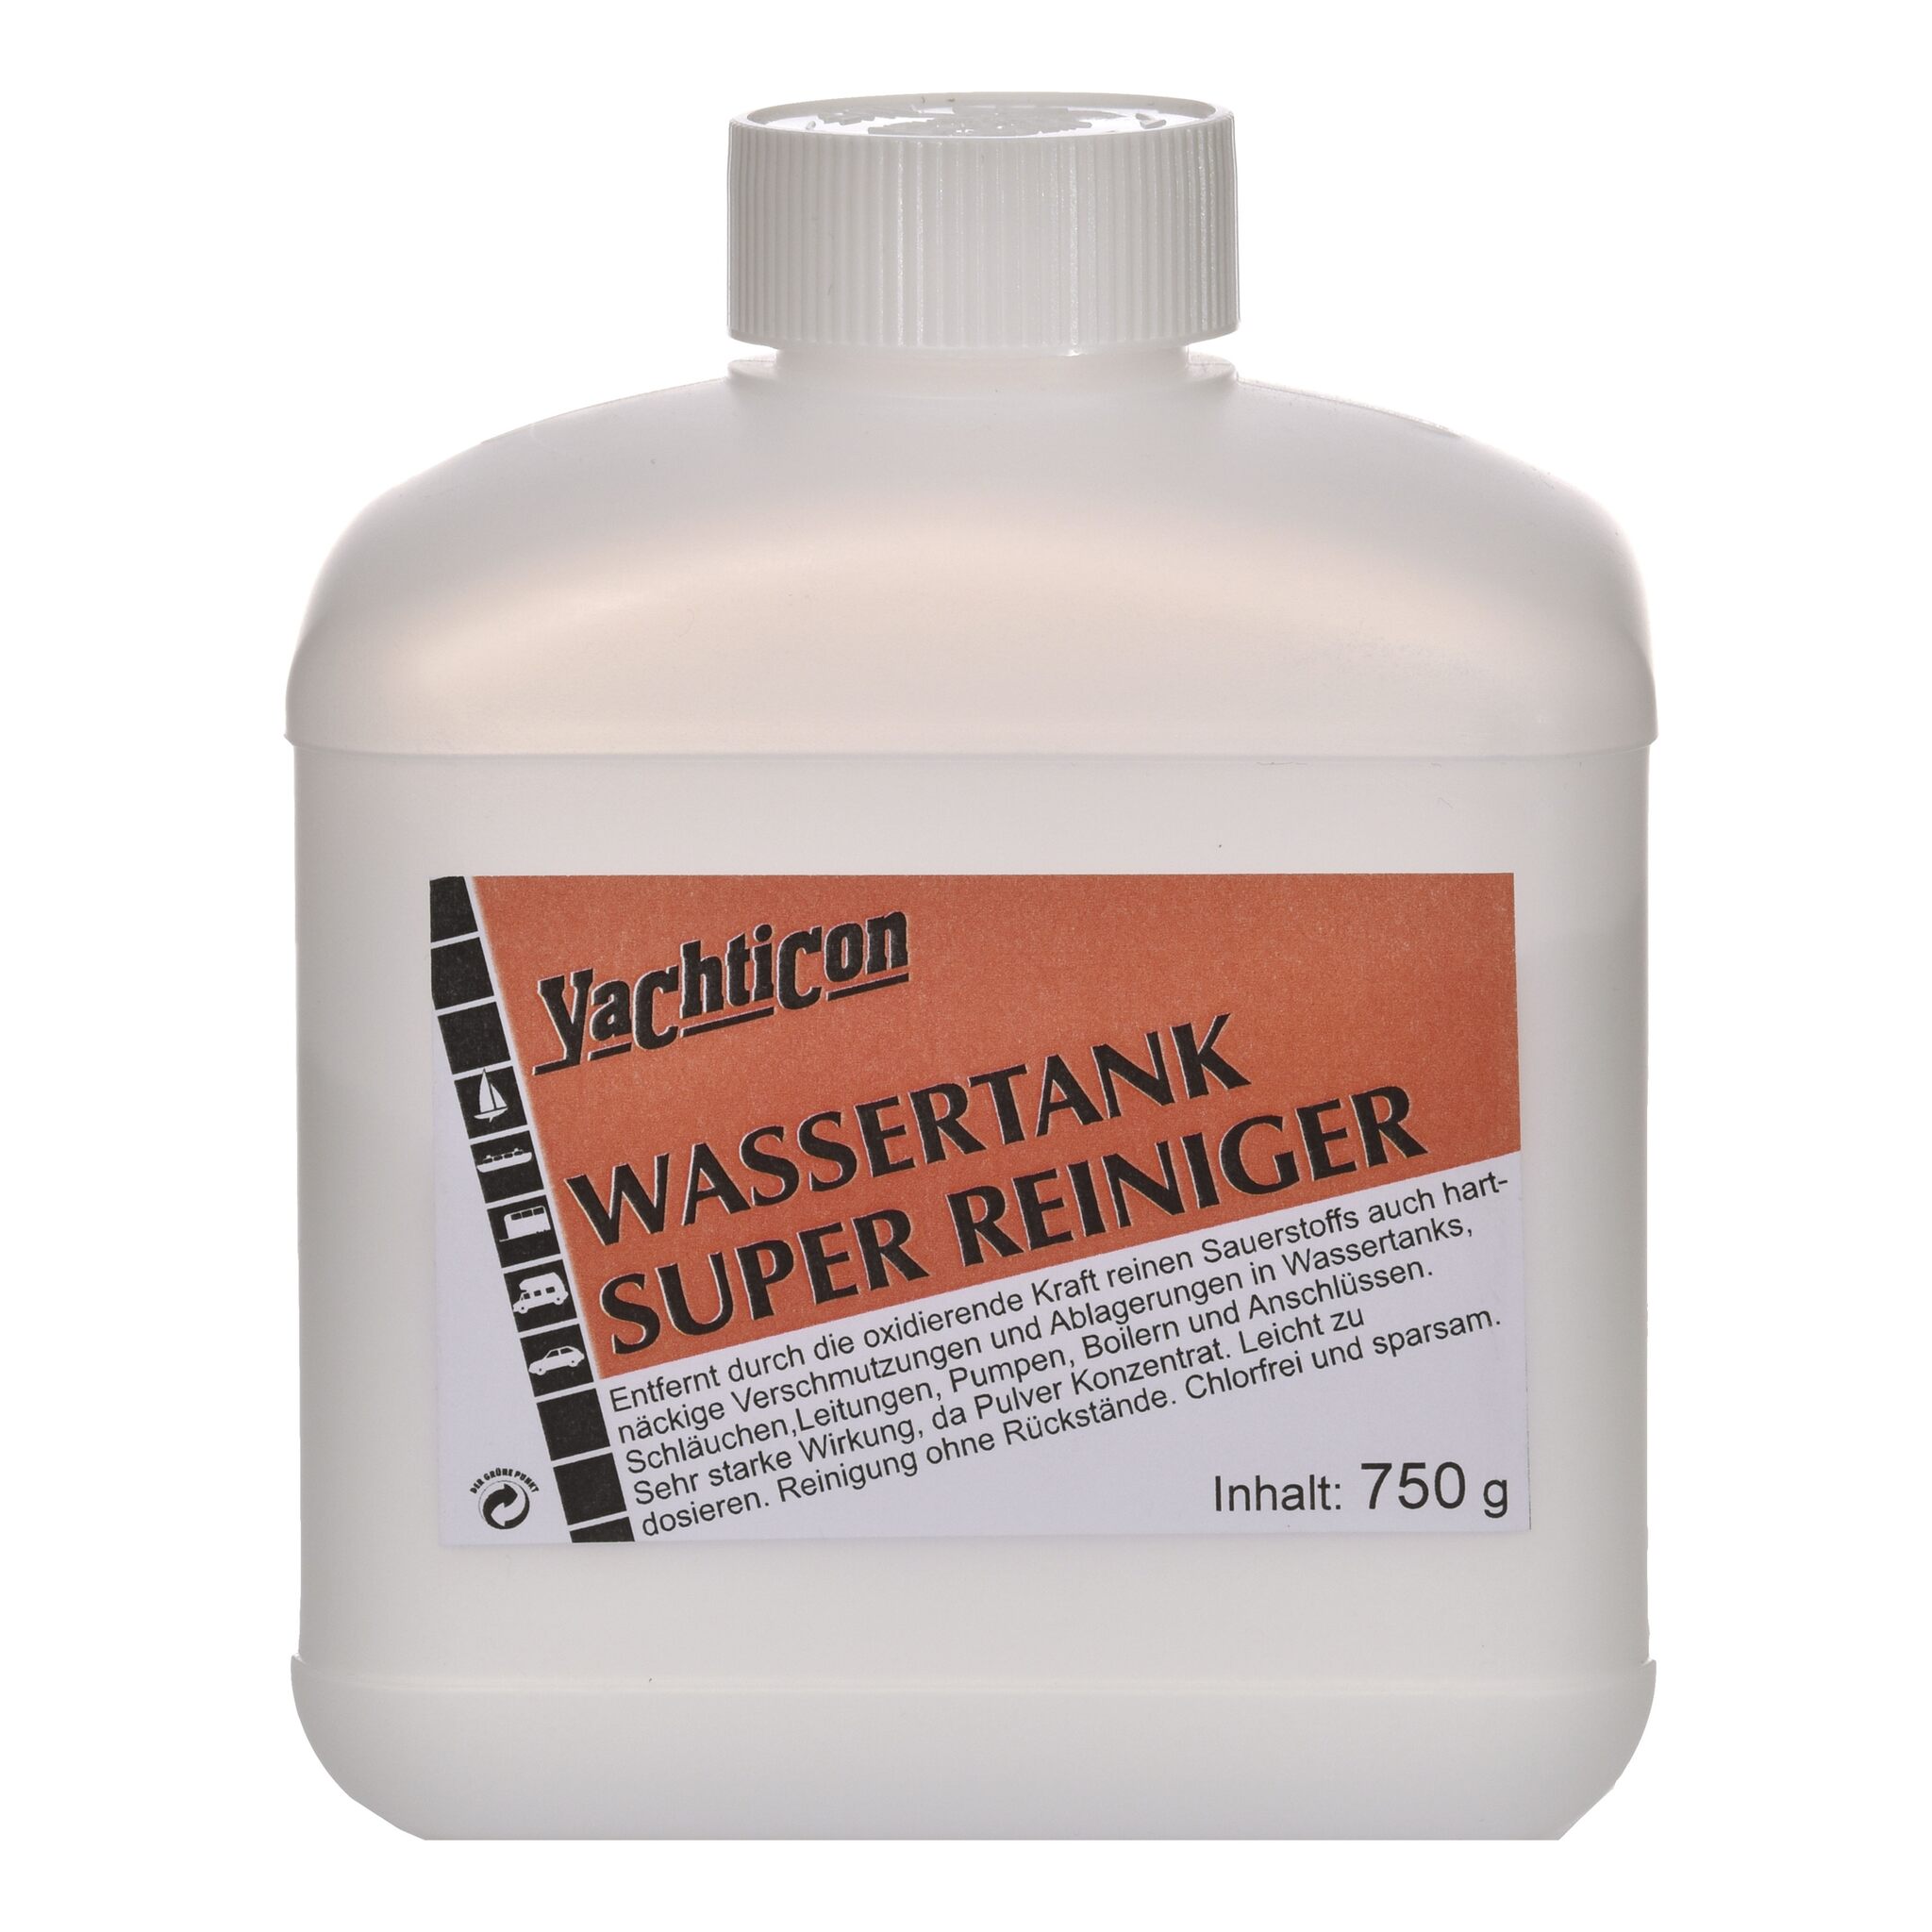 Yachticon Water Tank Super Cleaner